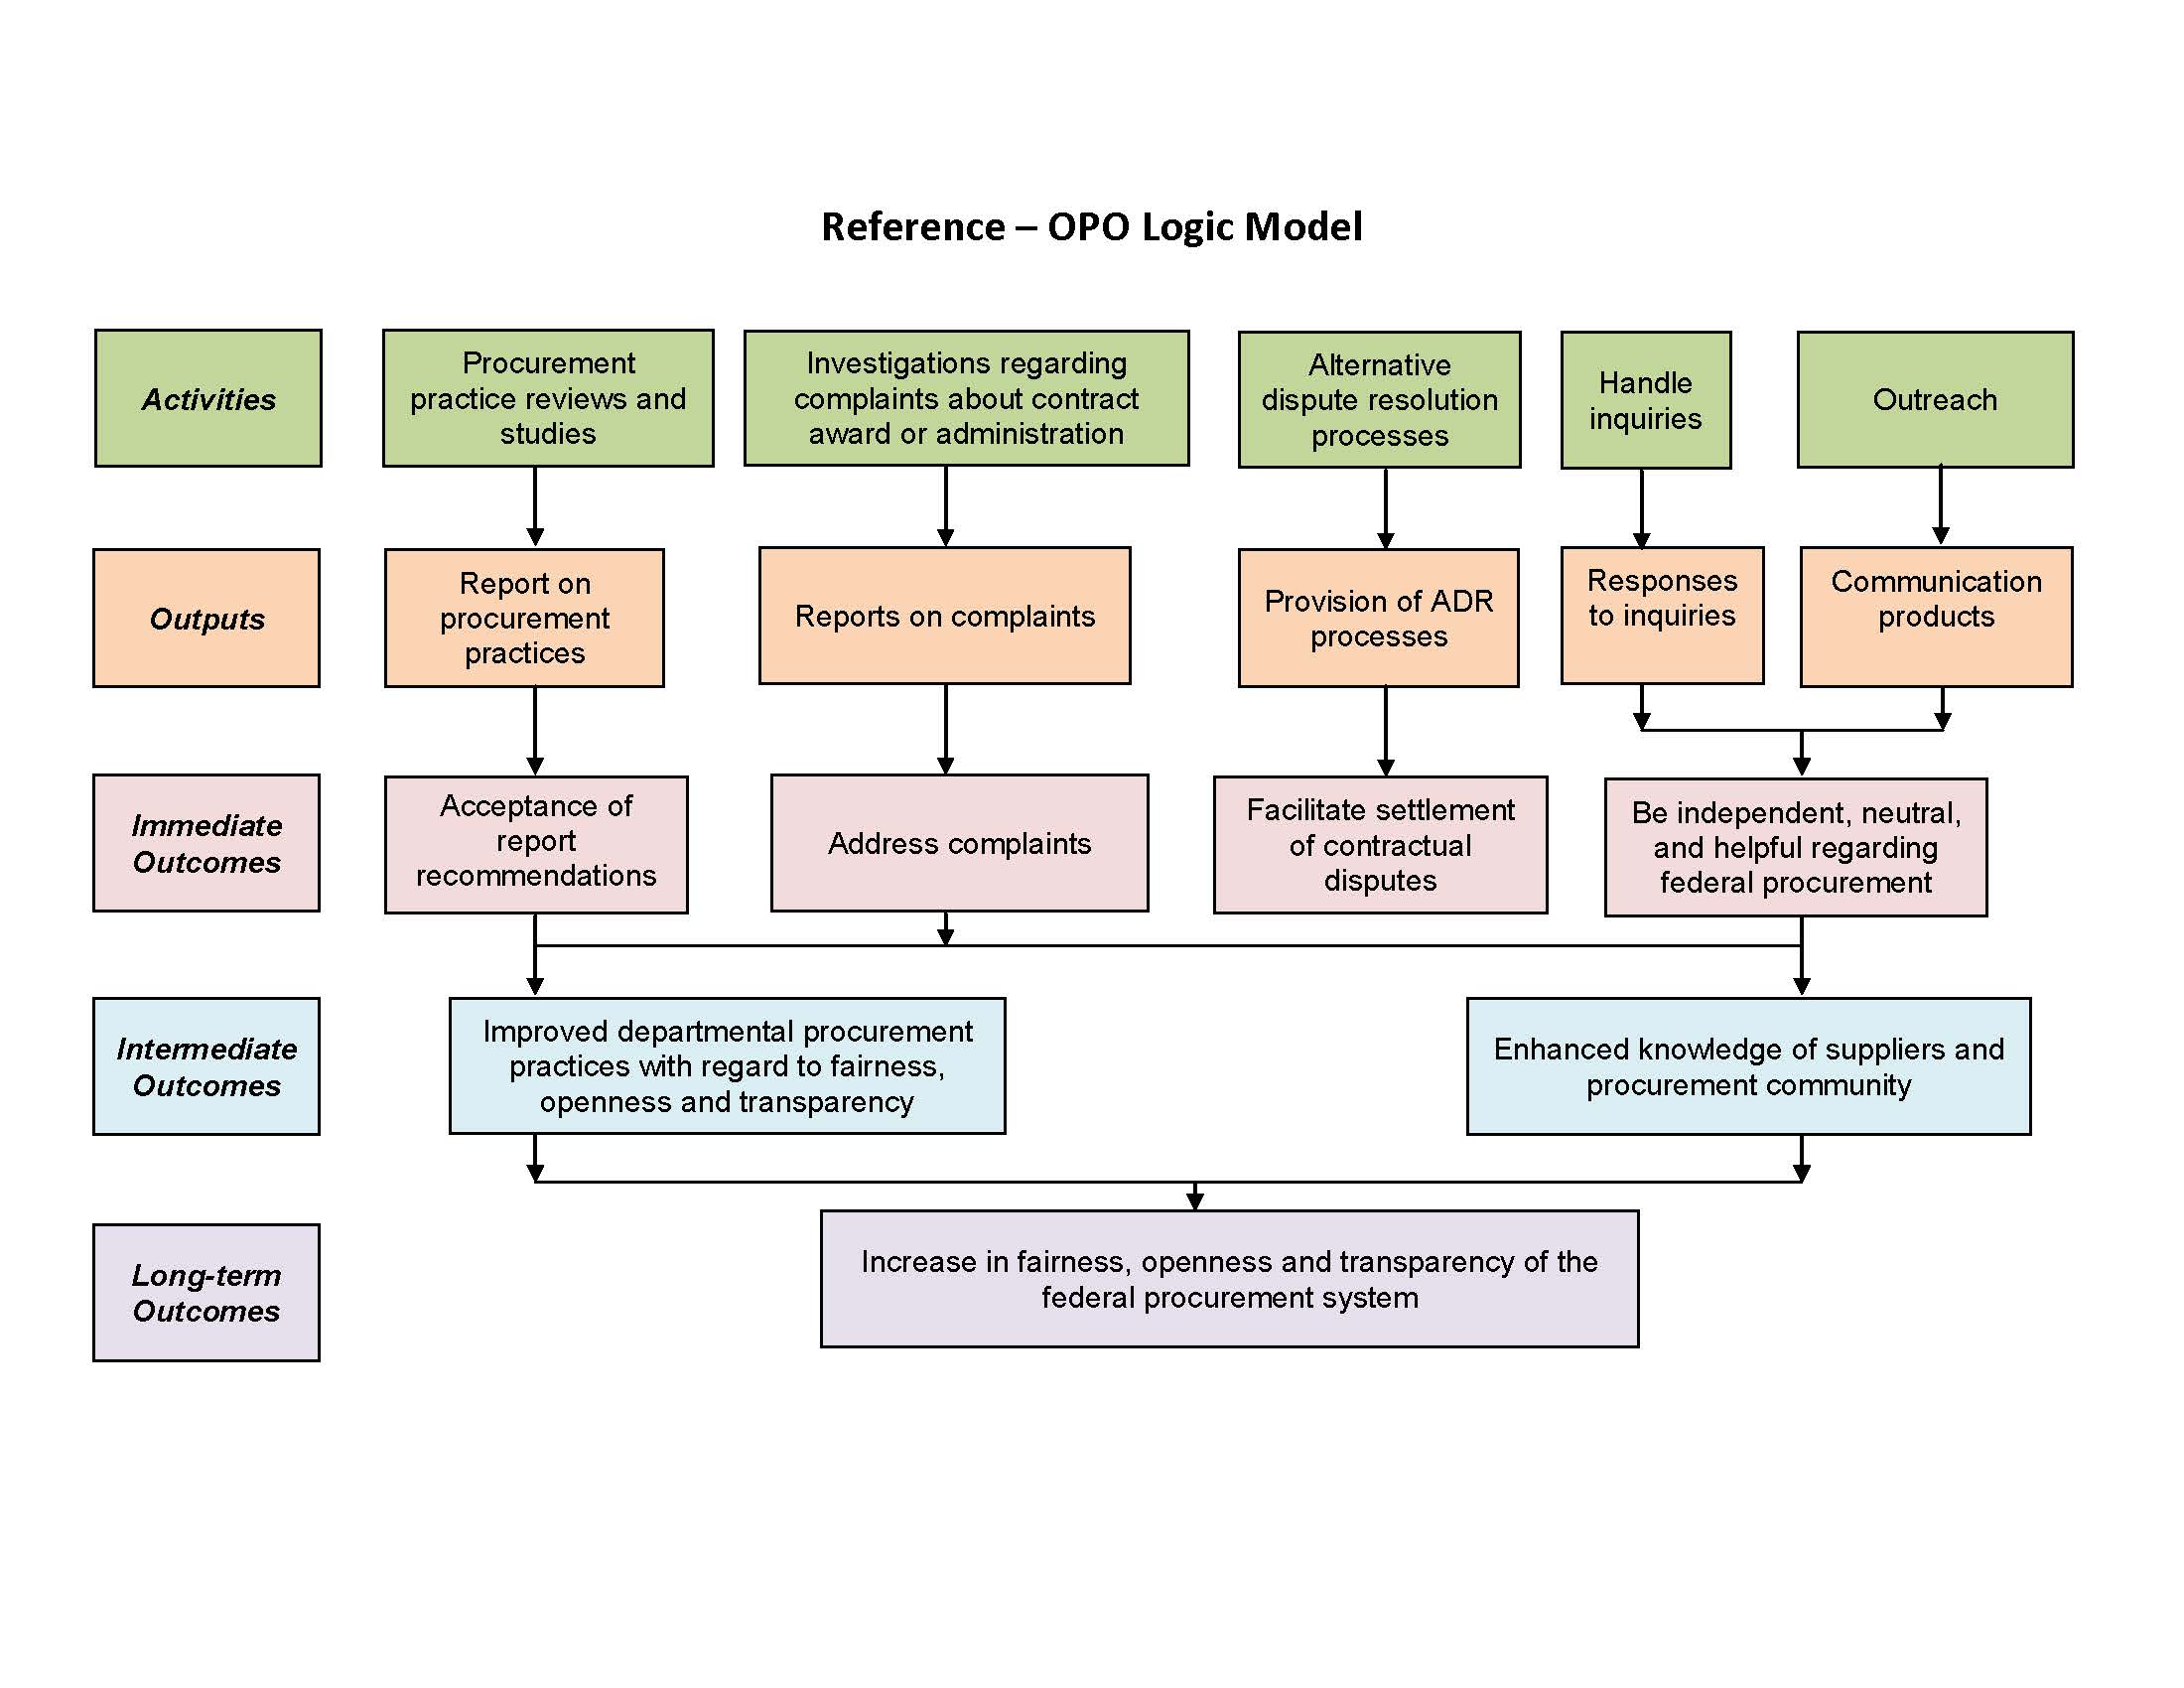 Logic Model of the Office of the Procurement Ombudsman